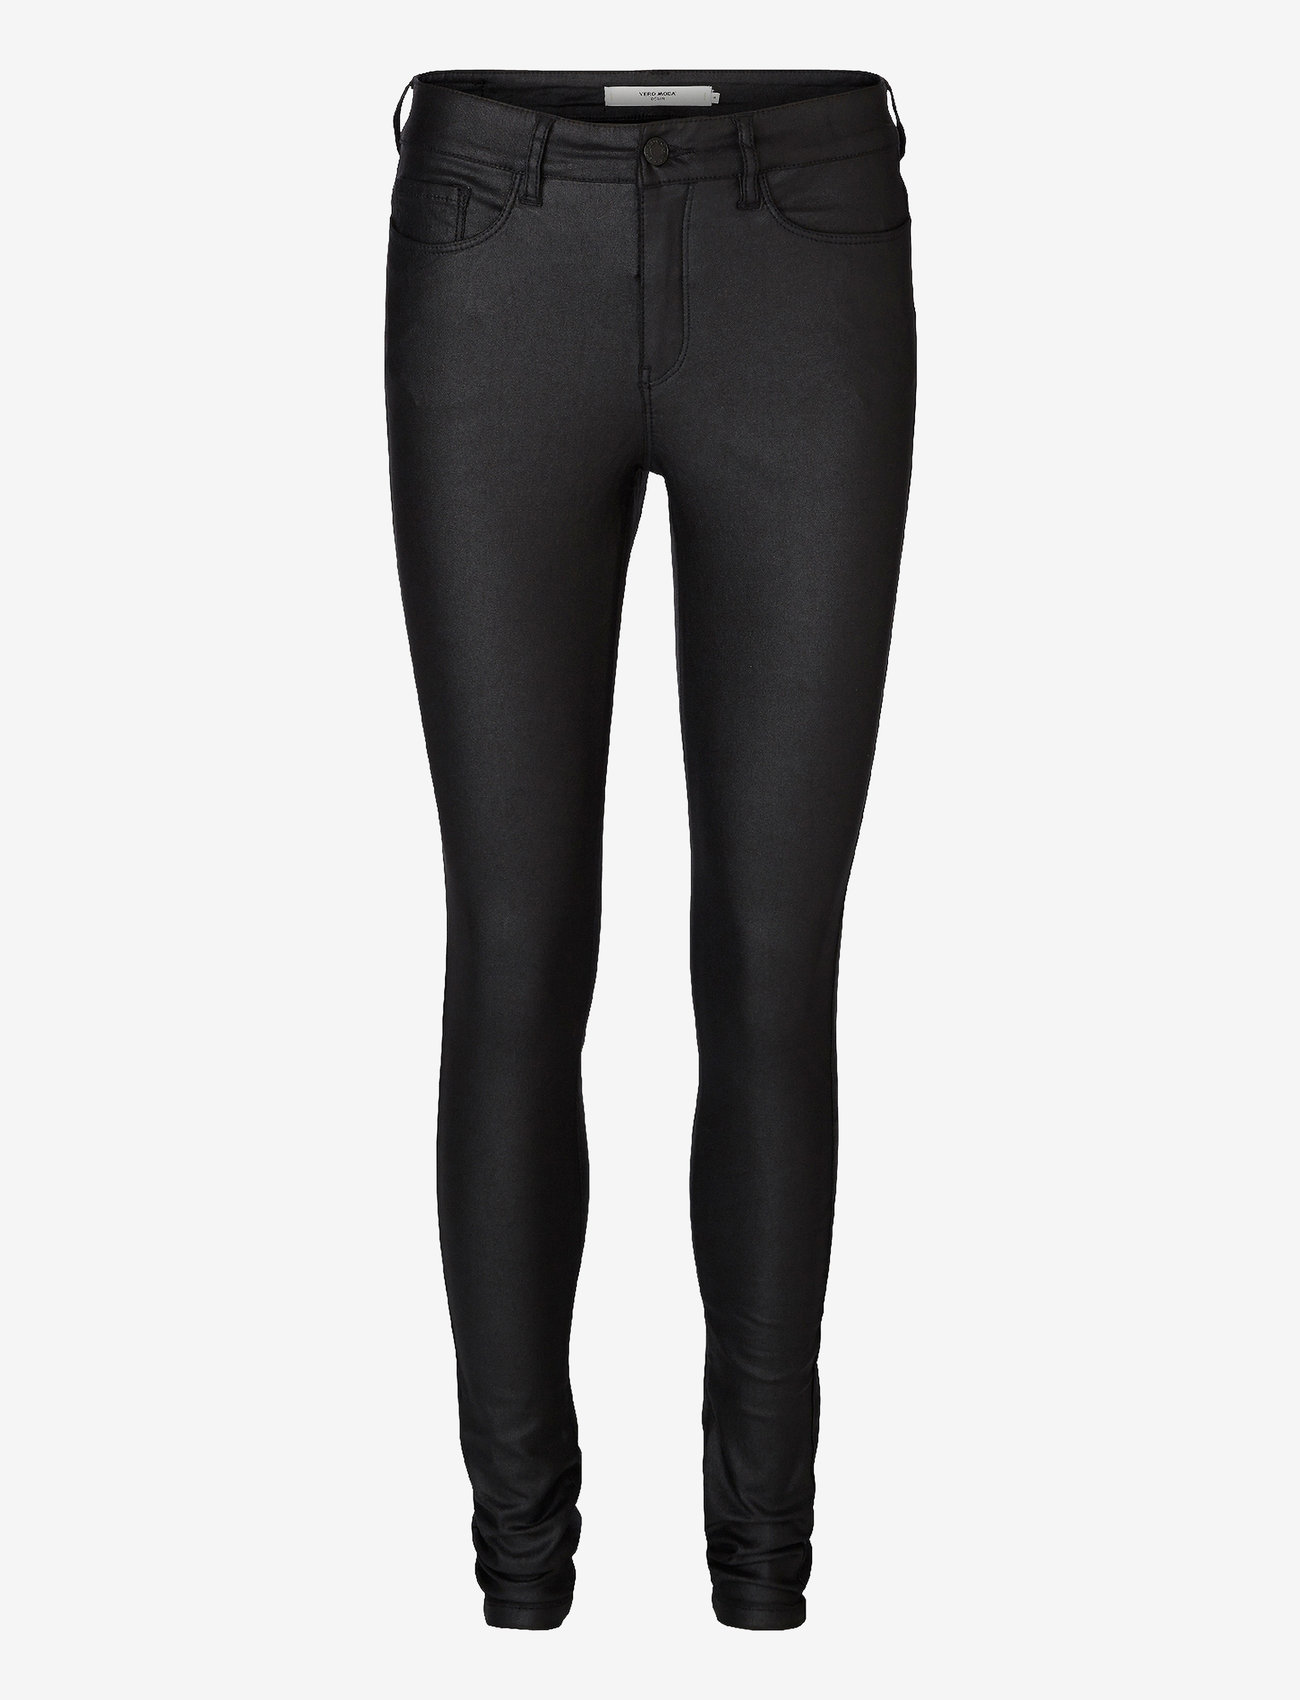 Vero Moda - VMSEVEN NW SS SMOOTH COATED PANTS NOOS - skinny jeans - black - 0